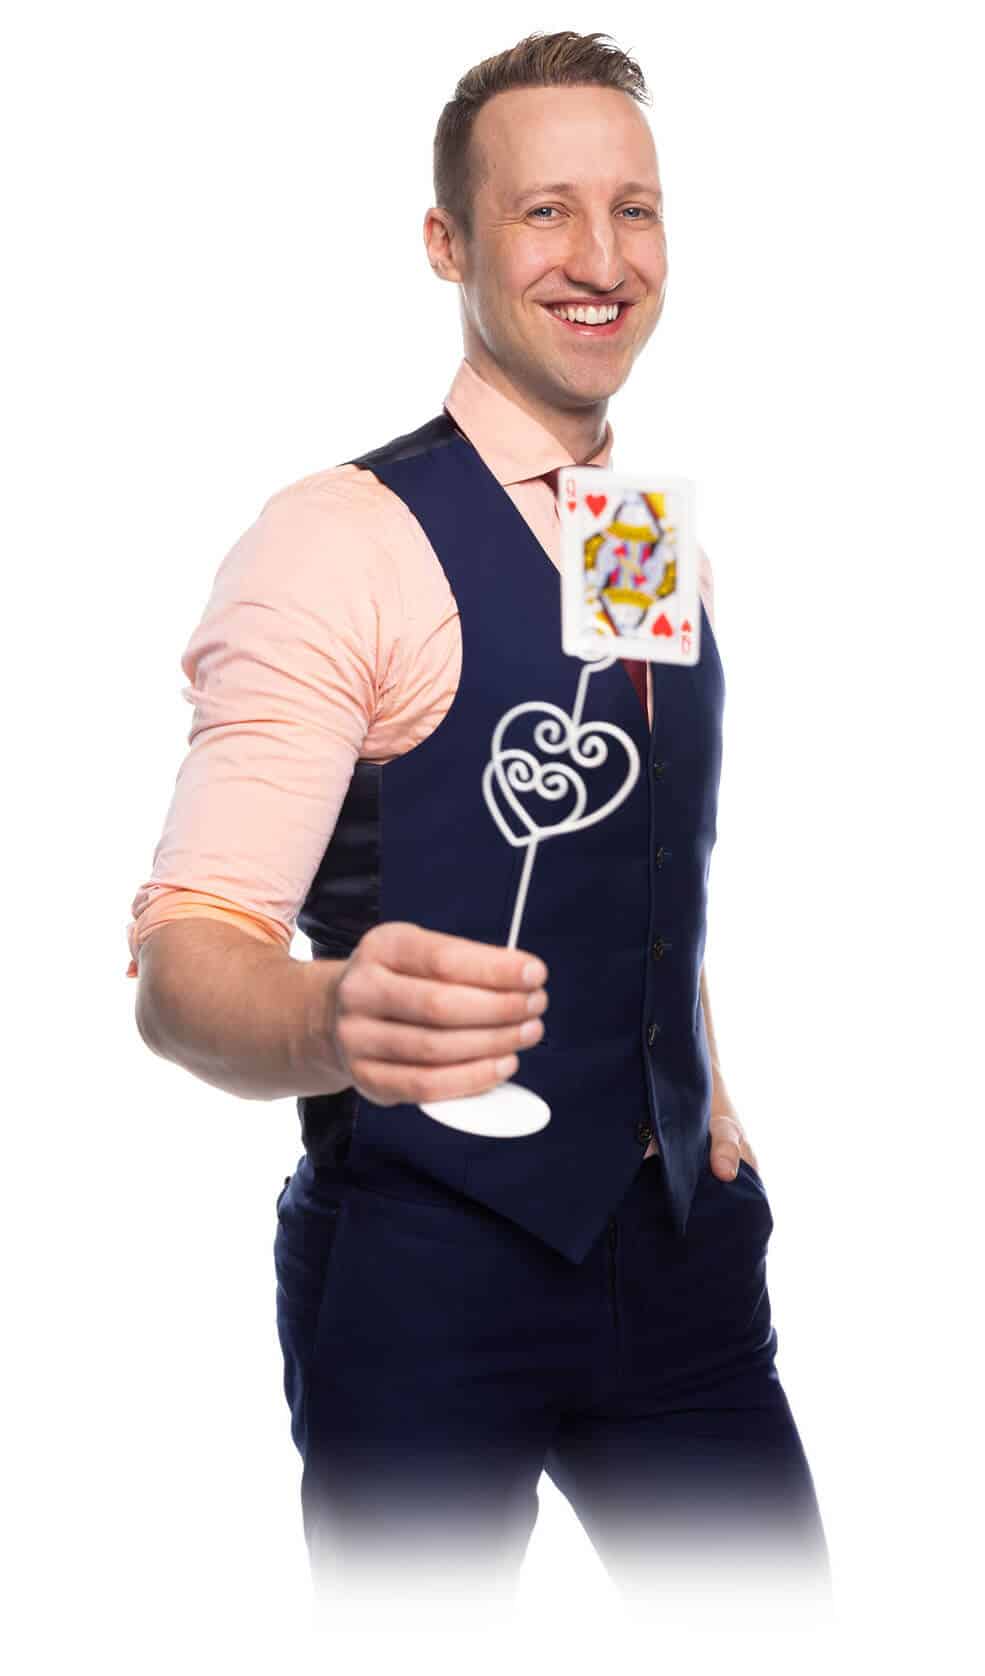 The wedding magician Fabian Schneekind smiles into the camera. In his hand, he holds a heart-shaped memo holder with a playing card clamped in it. The card is the Queen of Hearts and plays a crucial role in his wedding show.